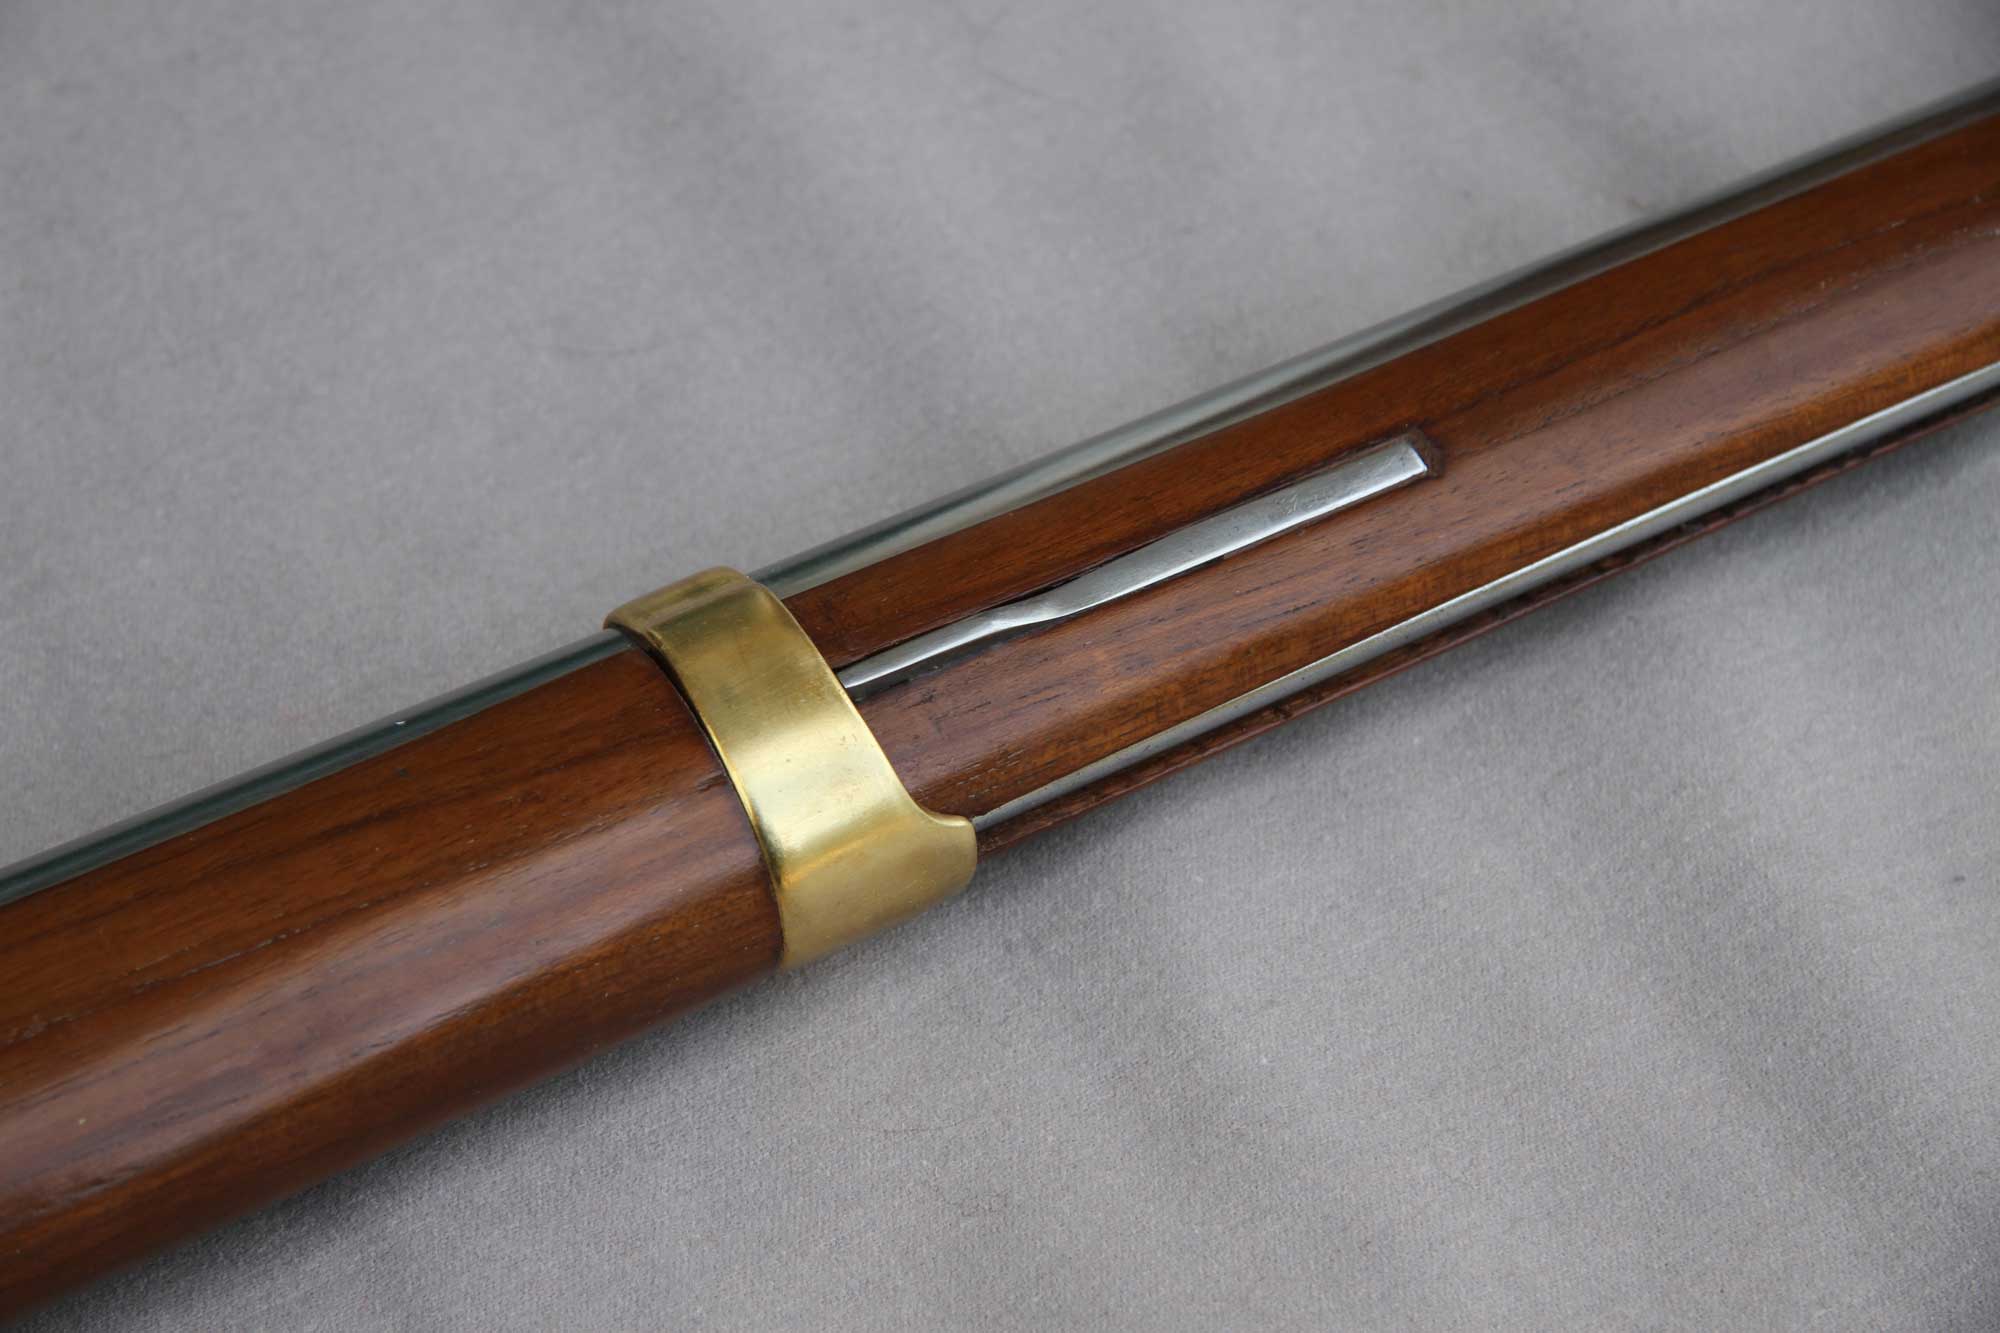 French 1777 Charleville musket (Garde Imperiale) - Click Image to Close